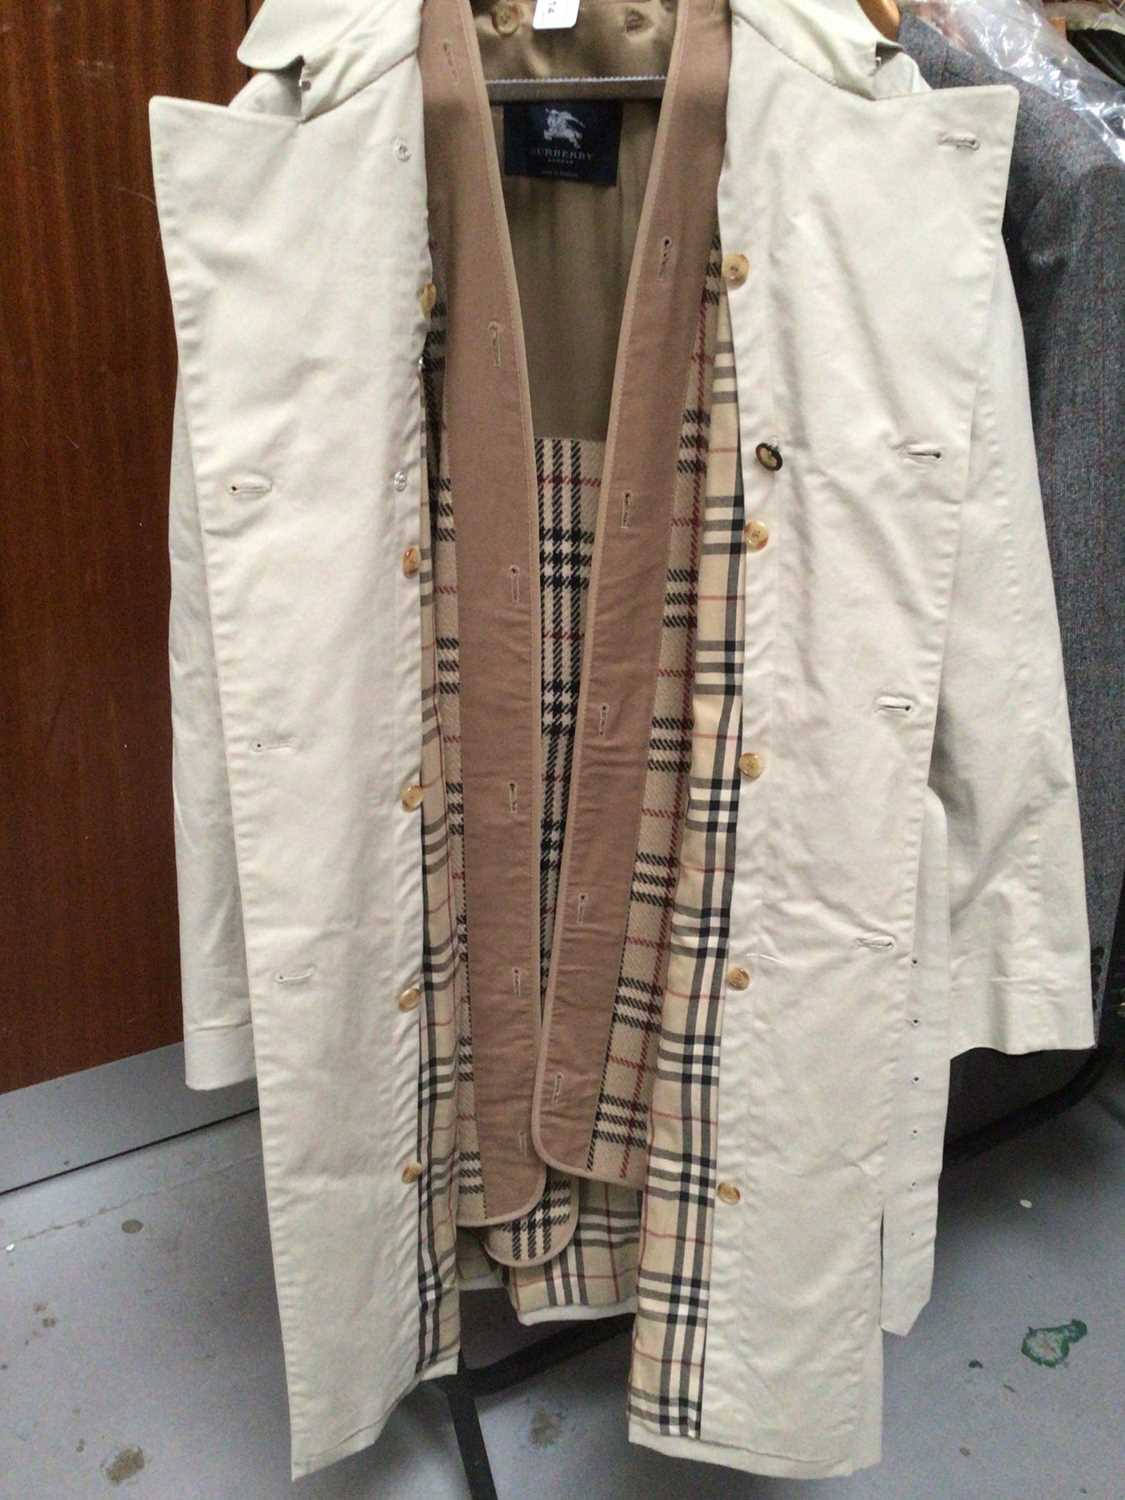 Burberry Men's trench coat with tartan wool removeable lining. Size 56 R. - Image 4 of 4